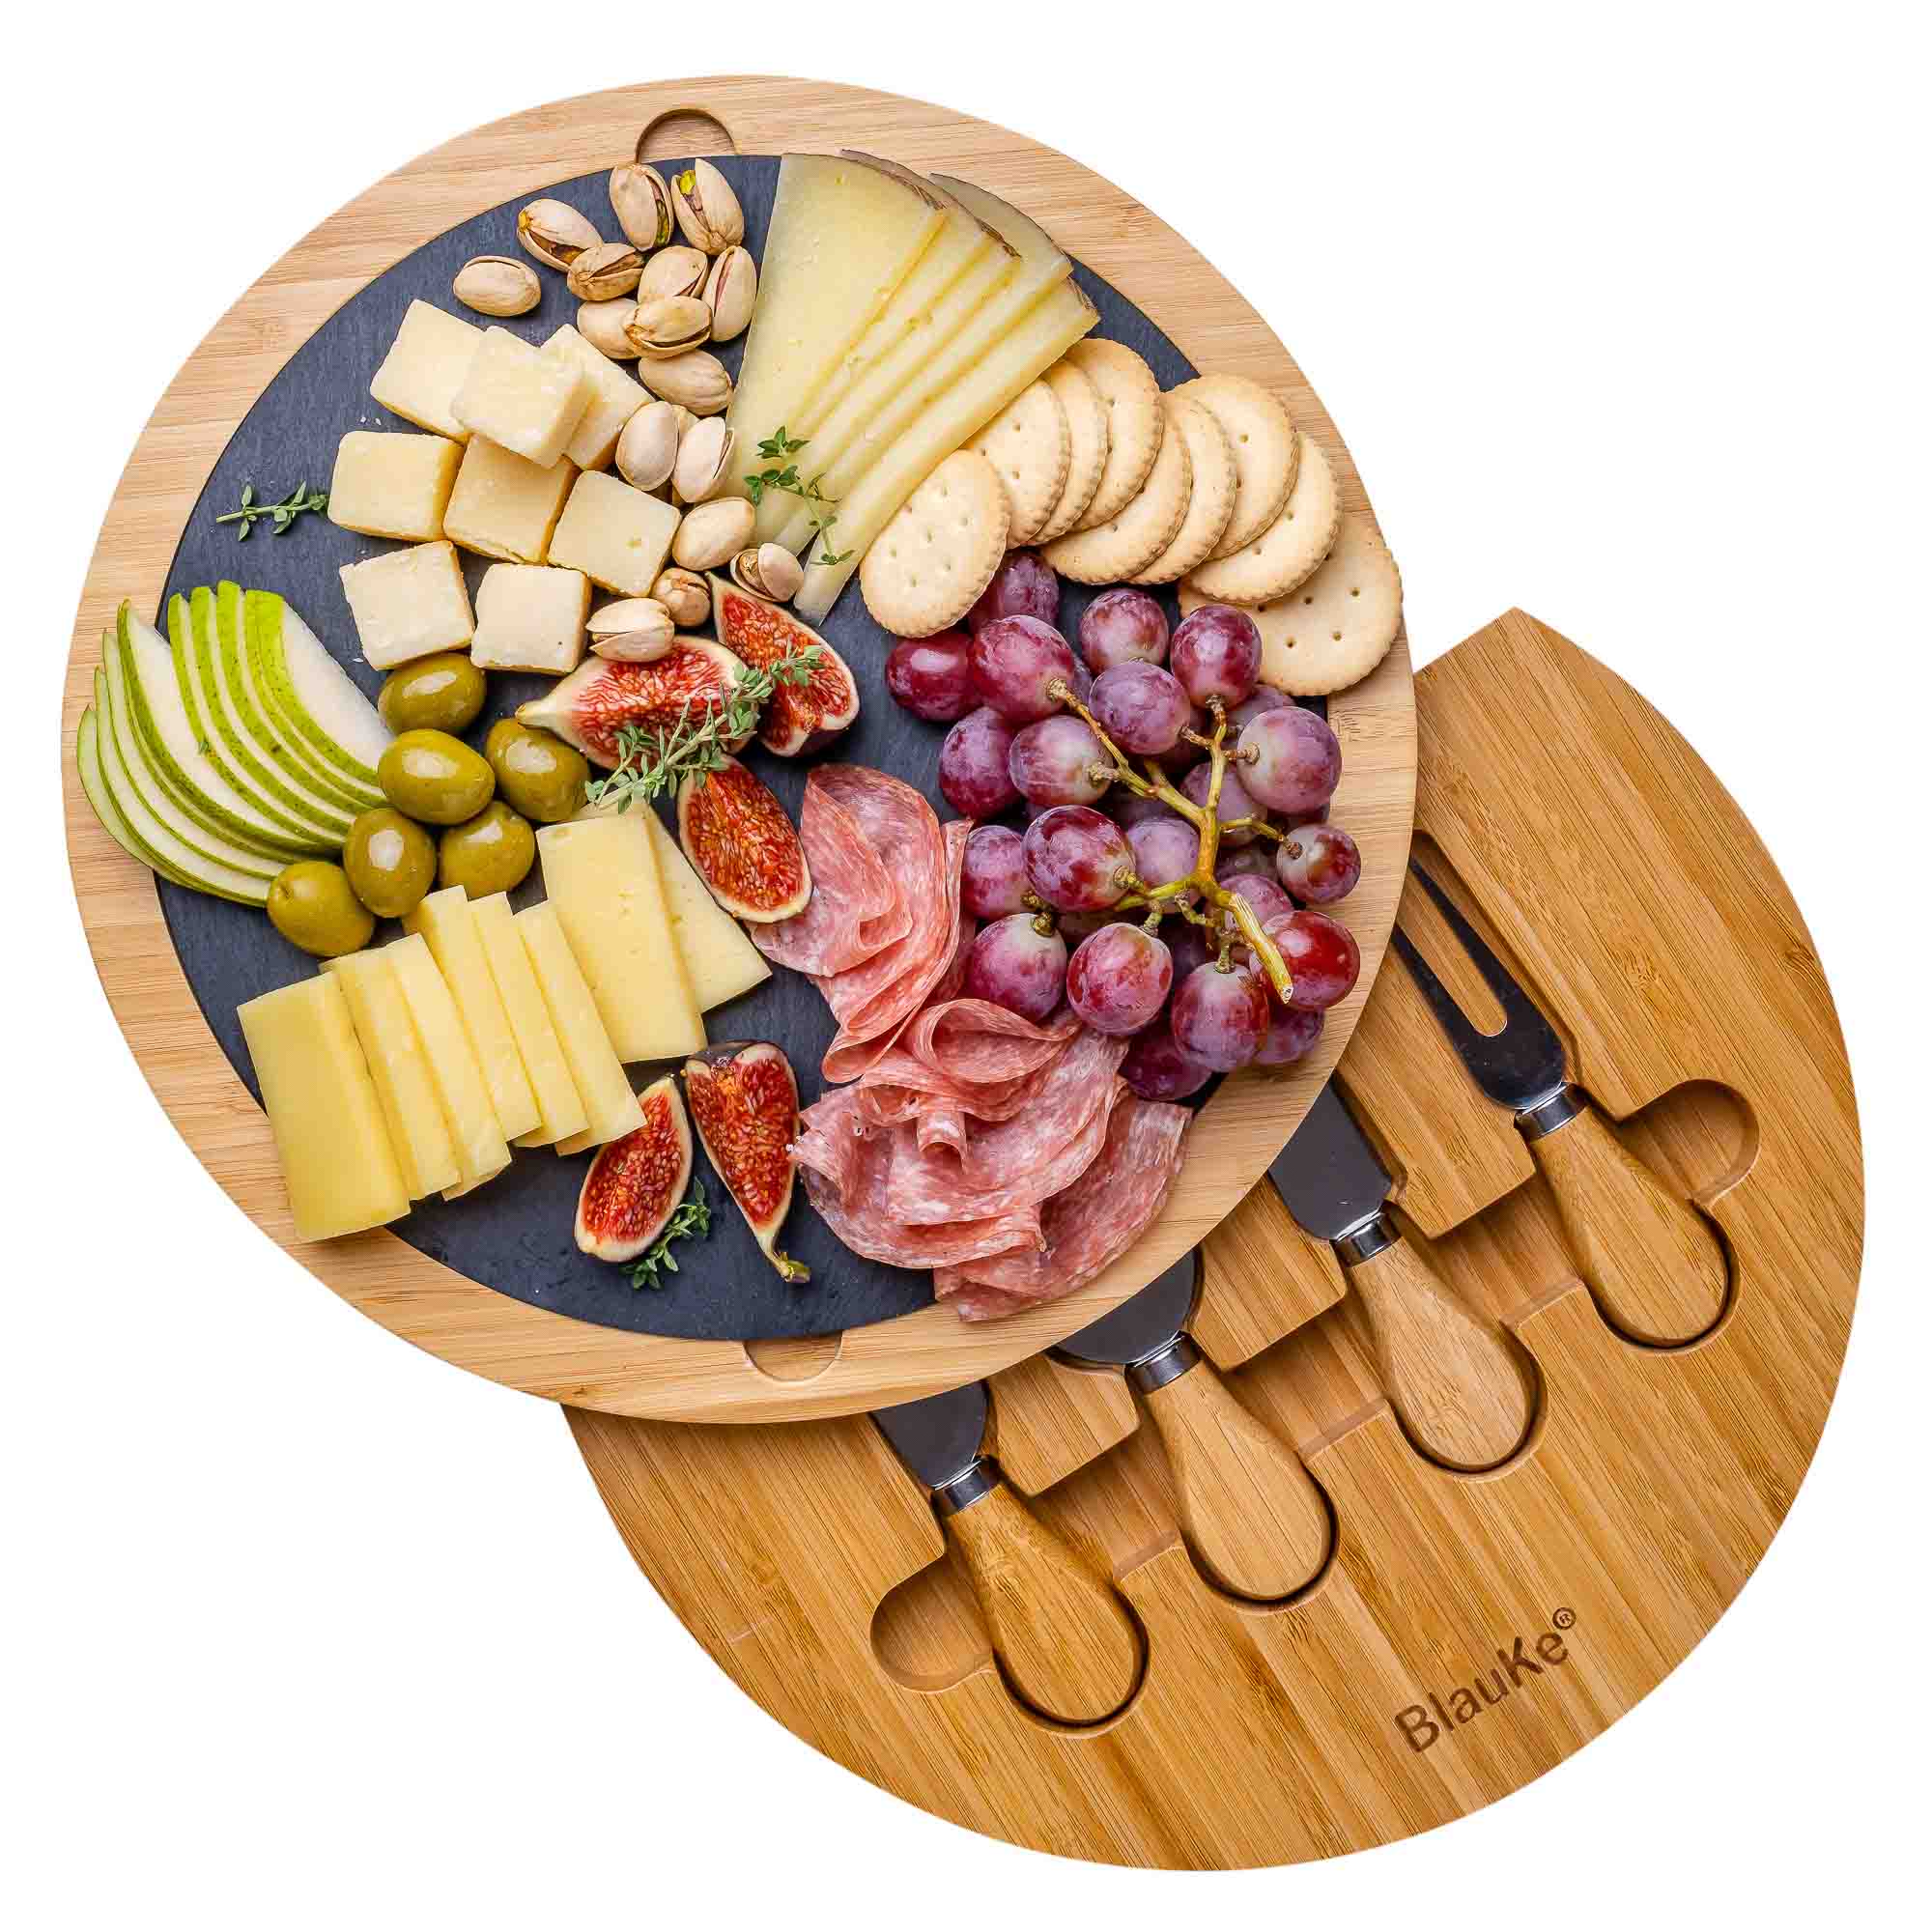 Round Bamboo Cheese Board with Knife Set and Removable Slate - 12 inch